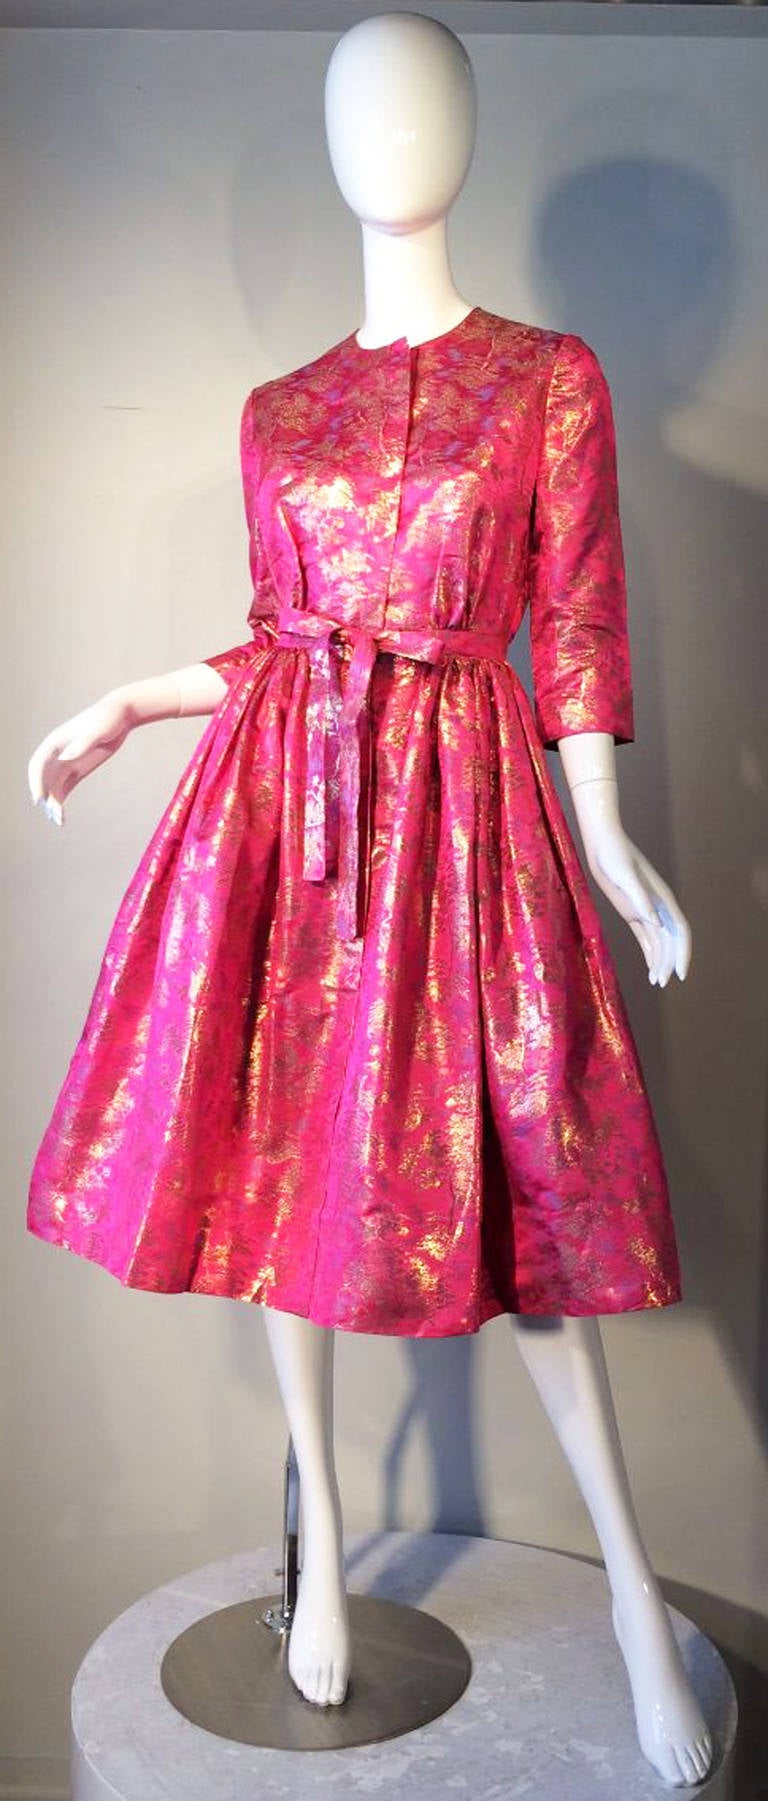 A fine vintage Larry Aldrich cocktail dress. Vivid pink silk brocade fabric features woven gold metallic details. Fully silk lined item features a nipped waist and full pleated sides skirt. Hidden button front closures with a attached bow tie front